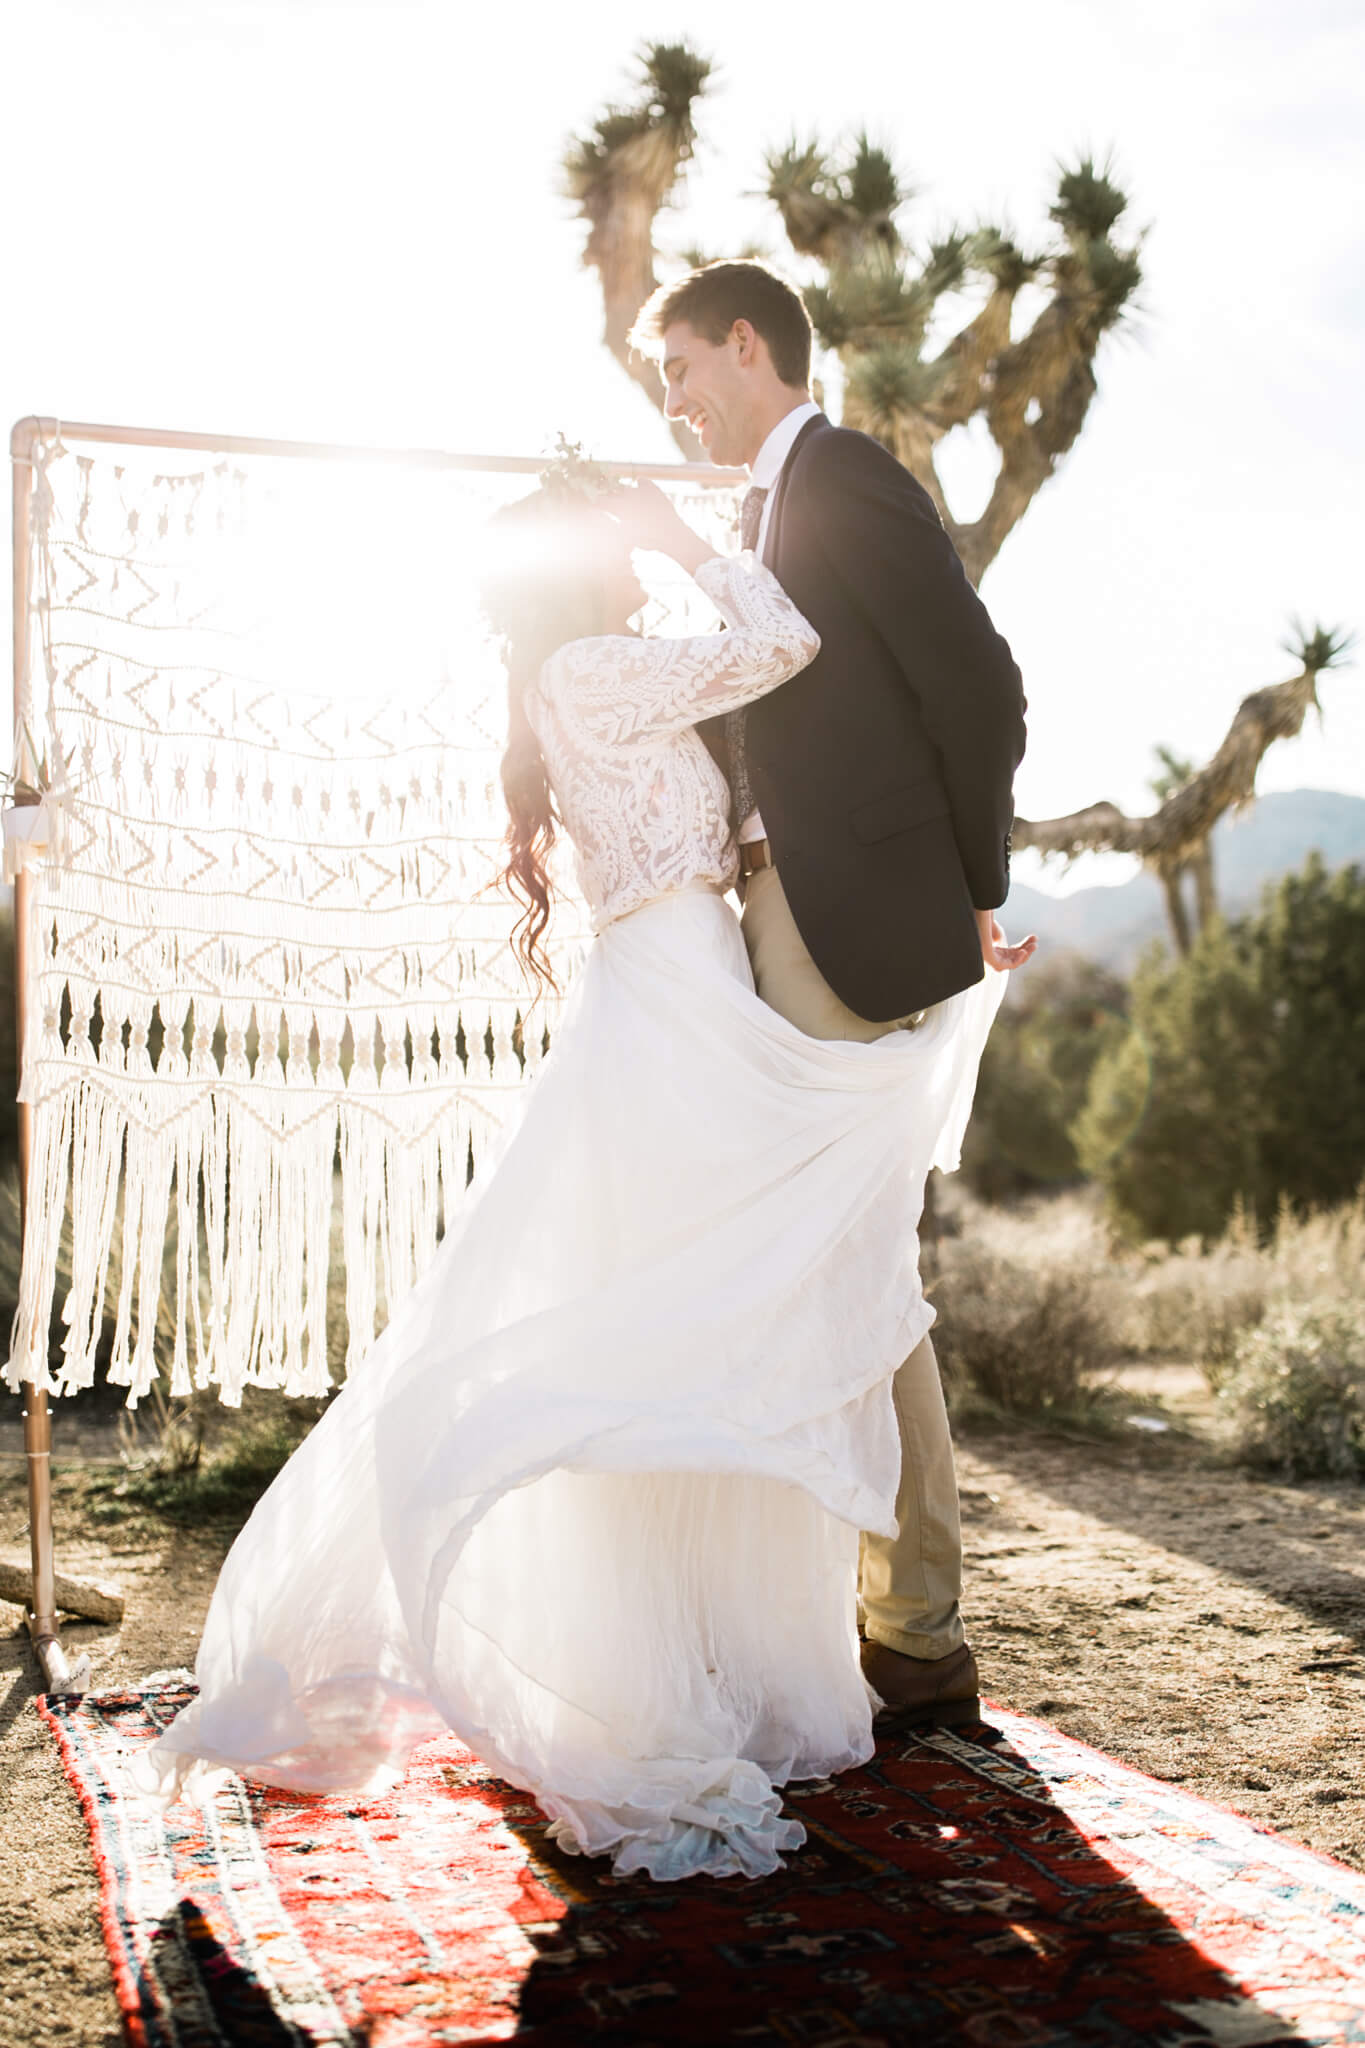 The adventerous couple during their Joshua Tree Elopement.